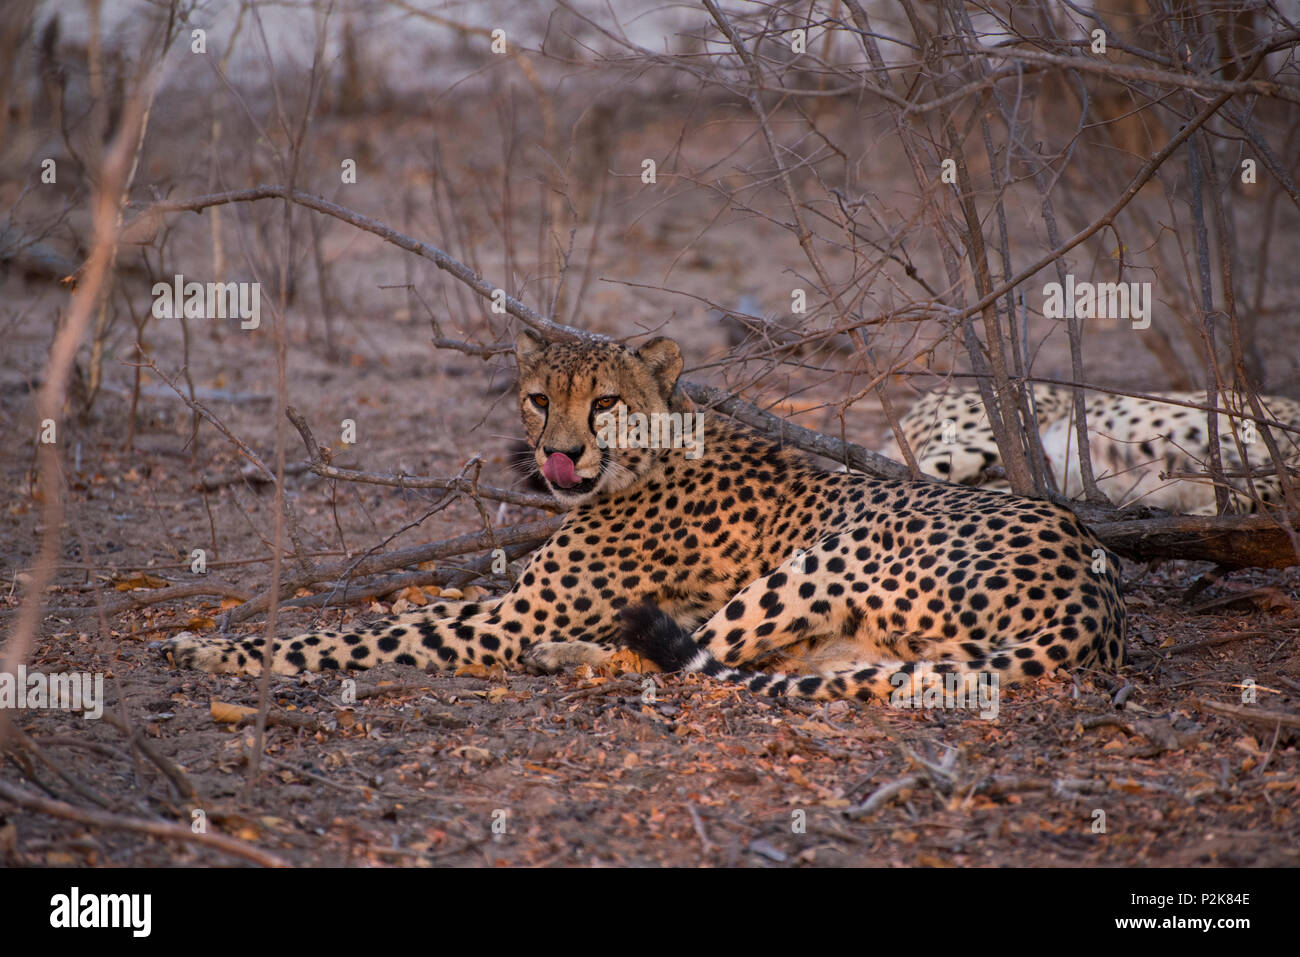 Wild Cheetah Photographed on Safari in South Africa Stock Photo